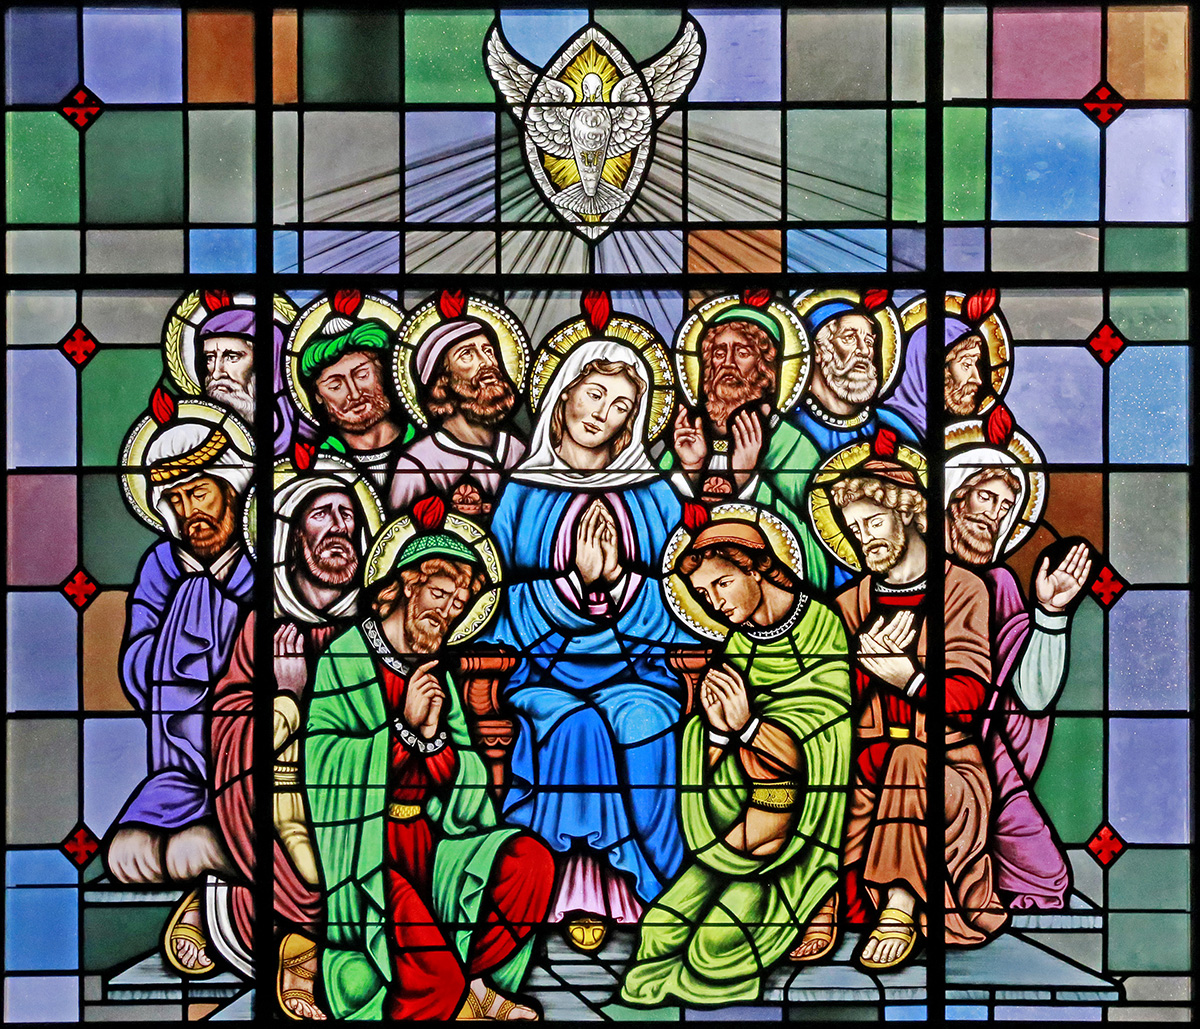 Pentecost: Let the Holy Spirit guide us